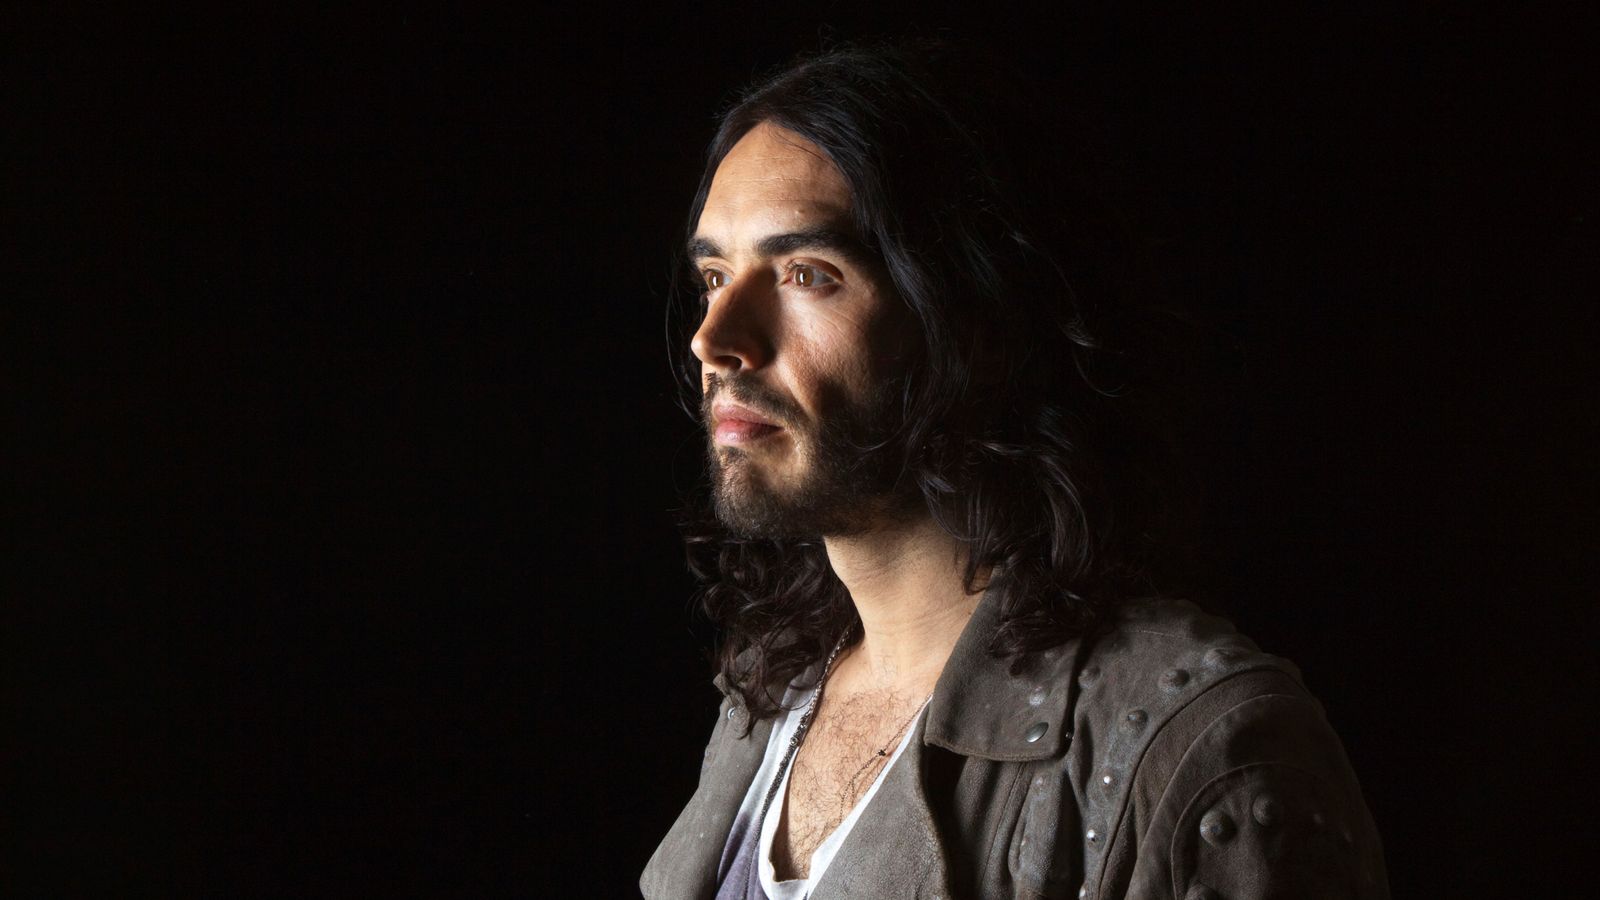 Russell Brand: Men more likely than women to think sex between 16 year old and older partner is okay